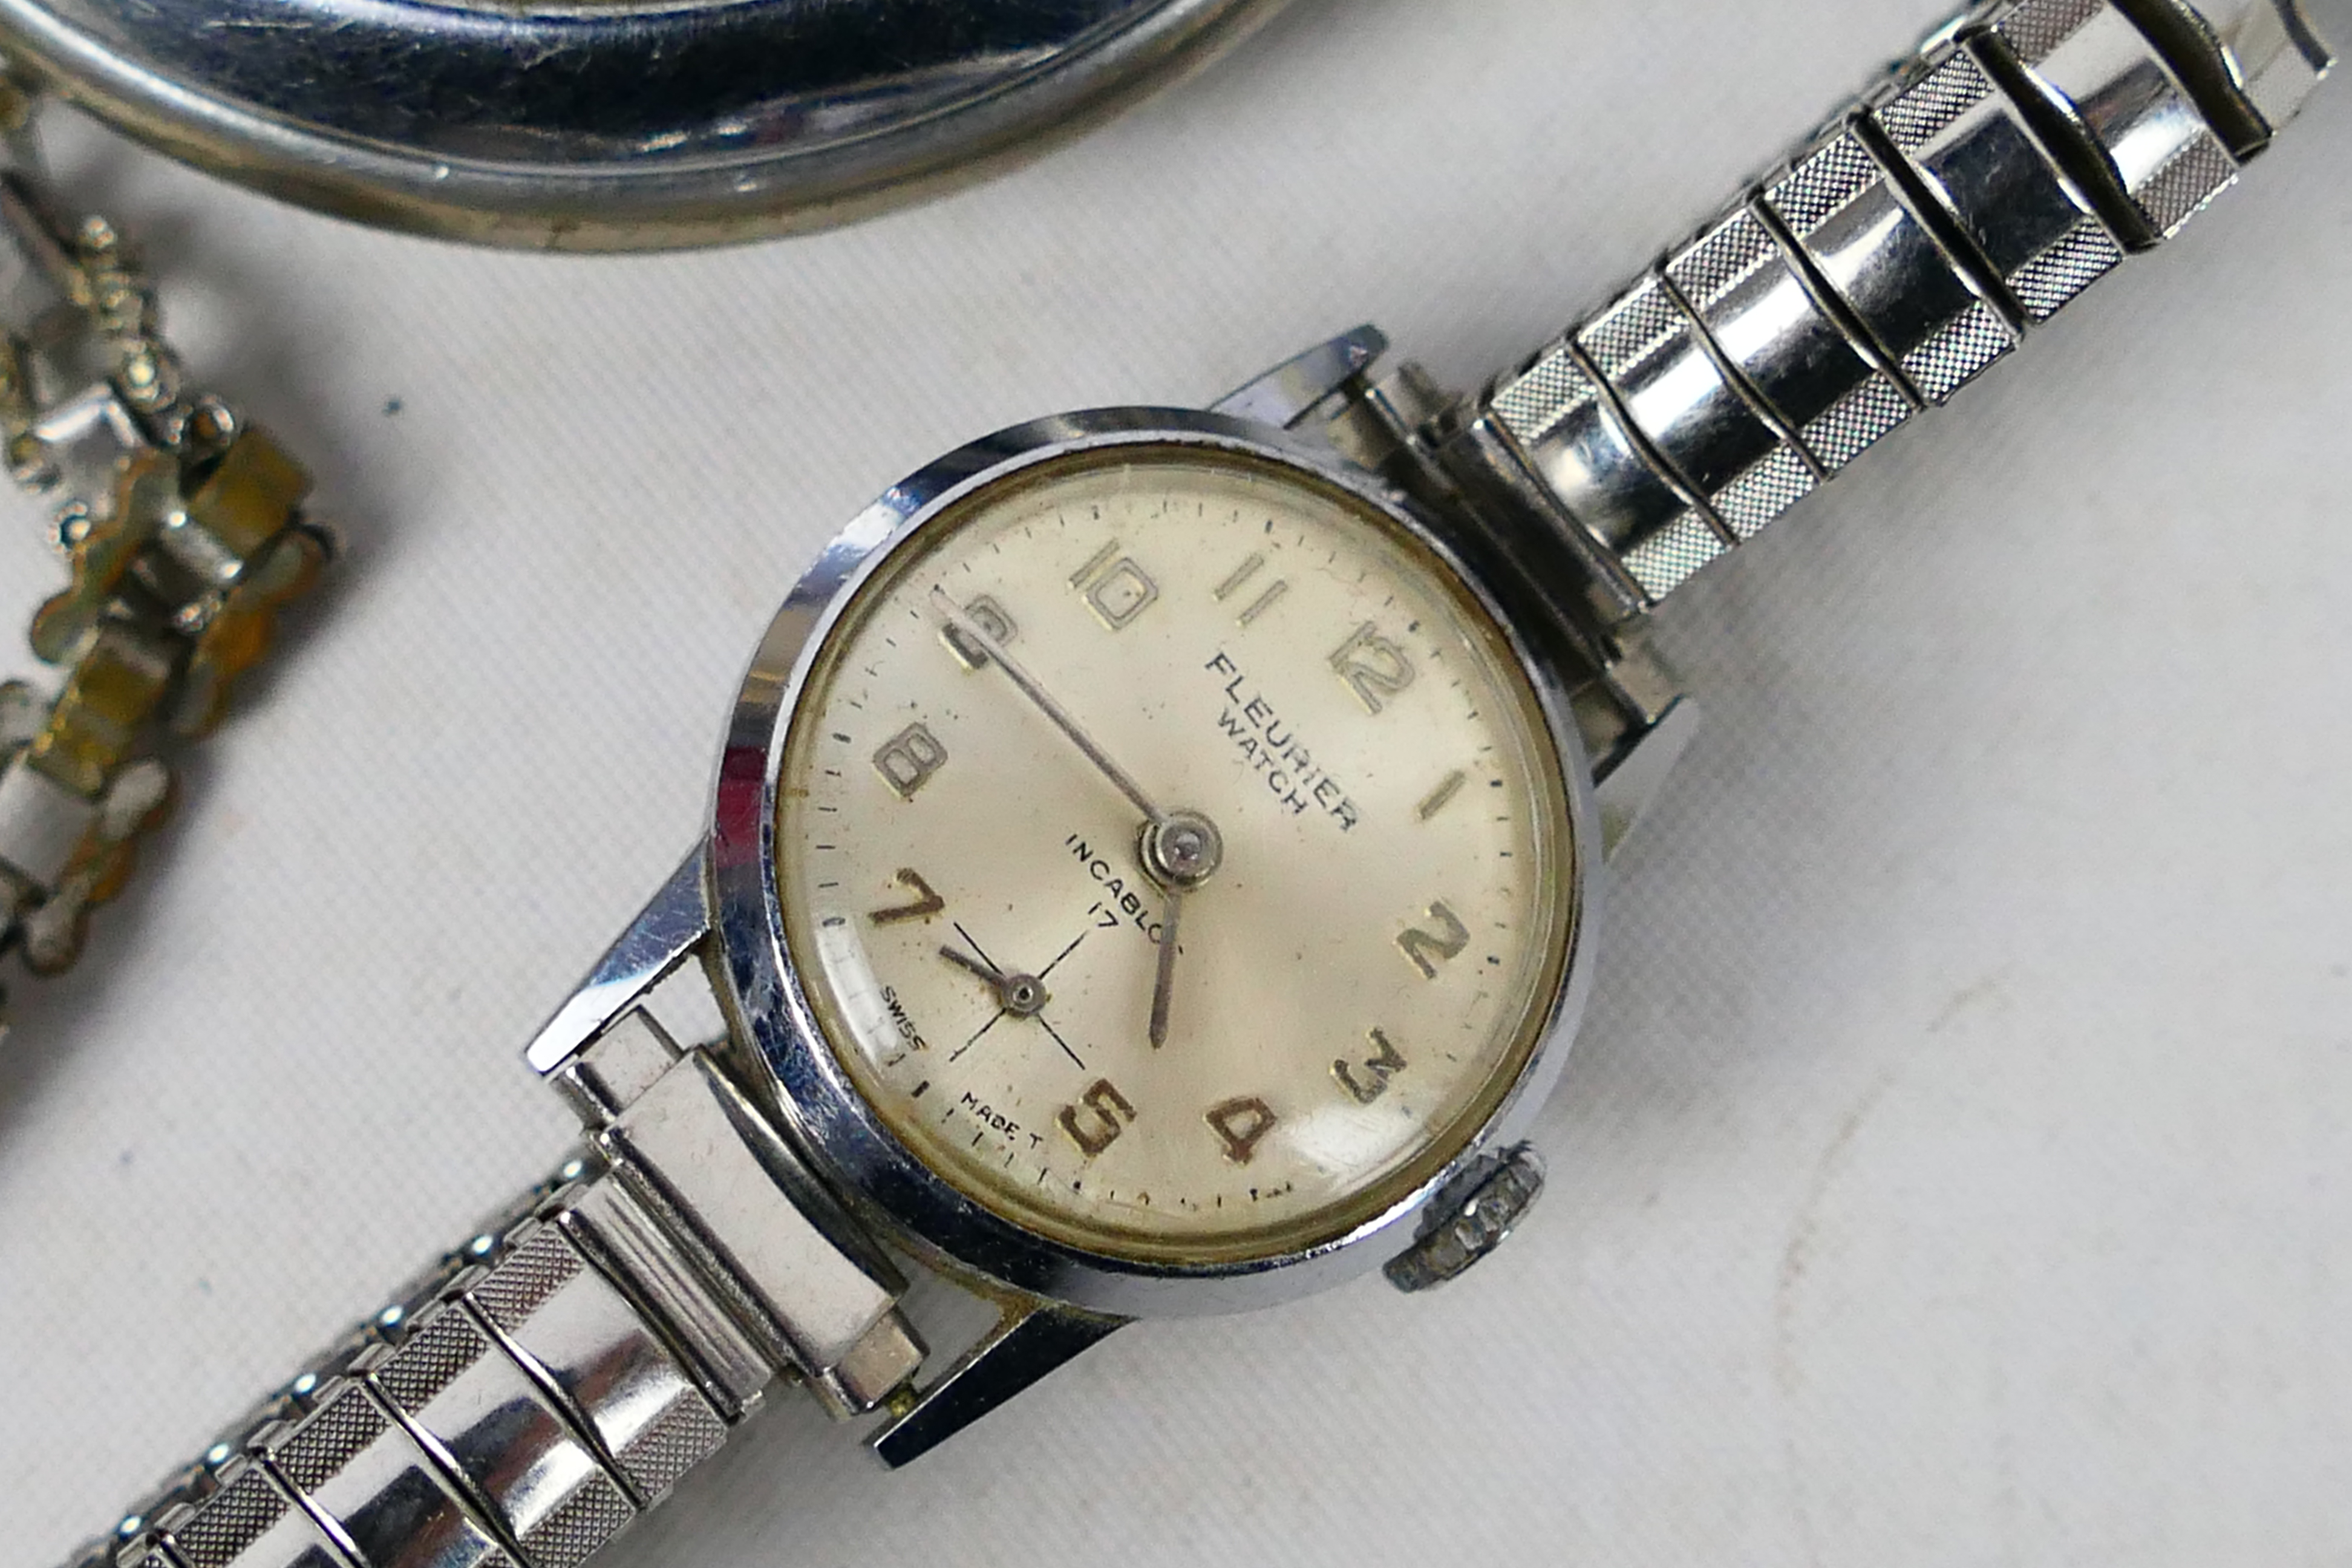 A collection or wrist watches and pocket watches. - Image 3 of 6